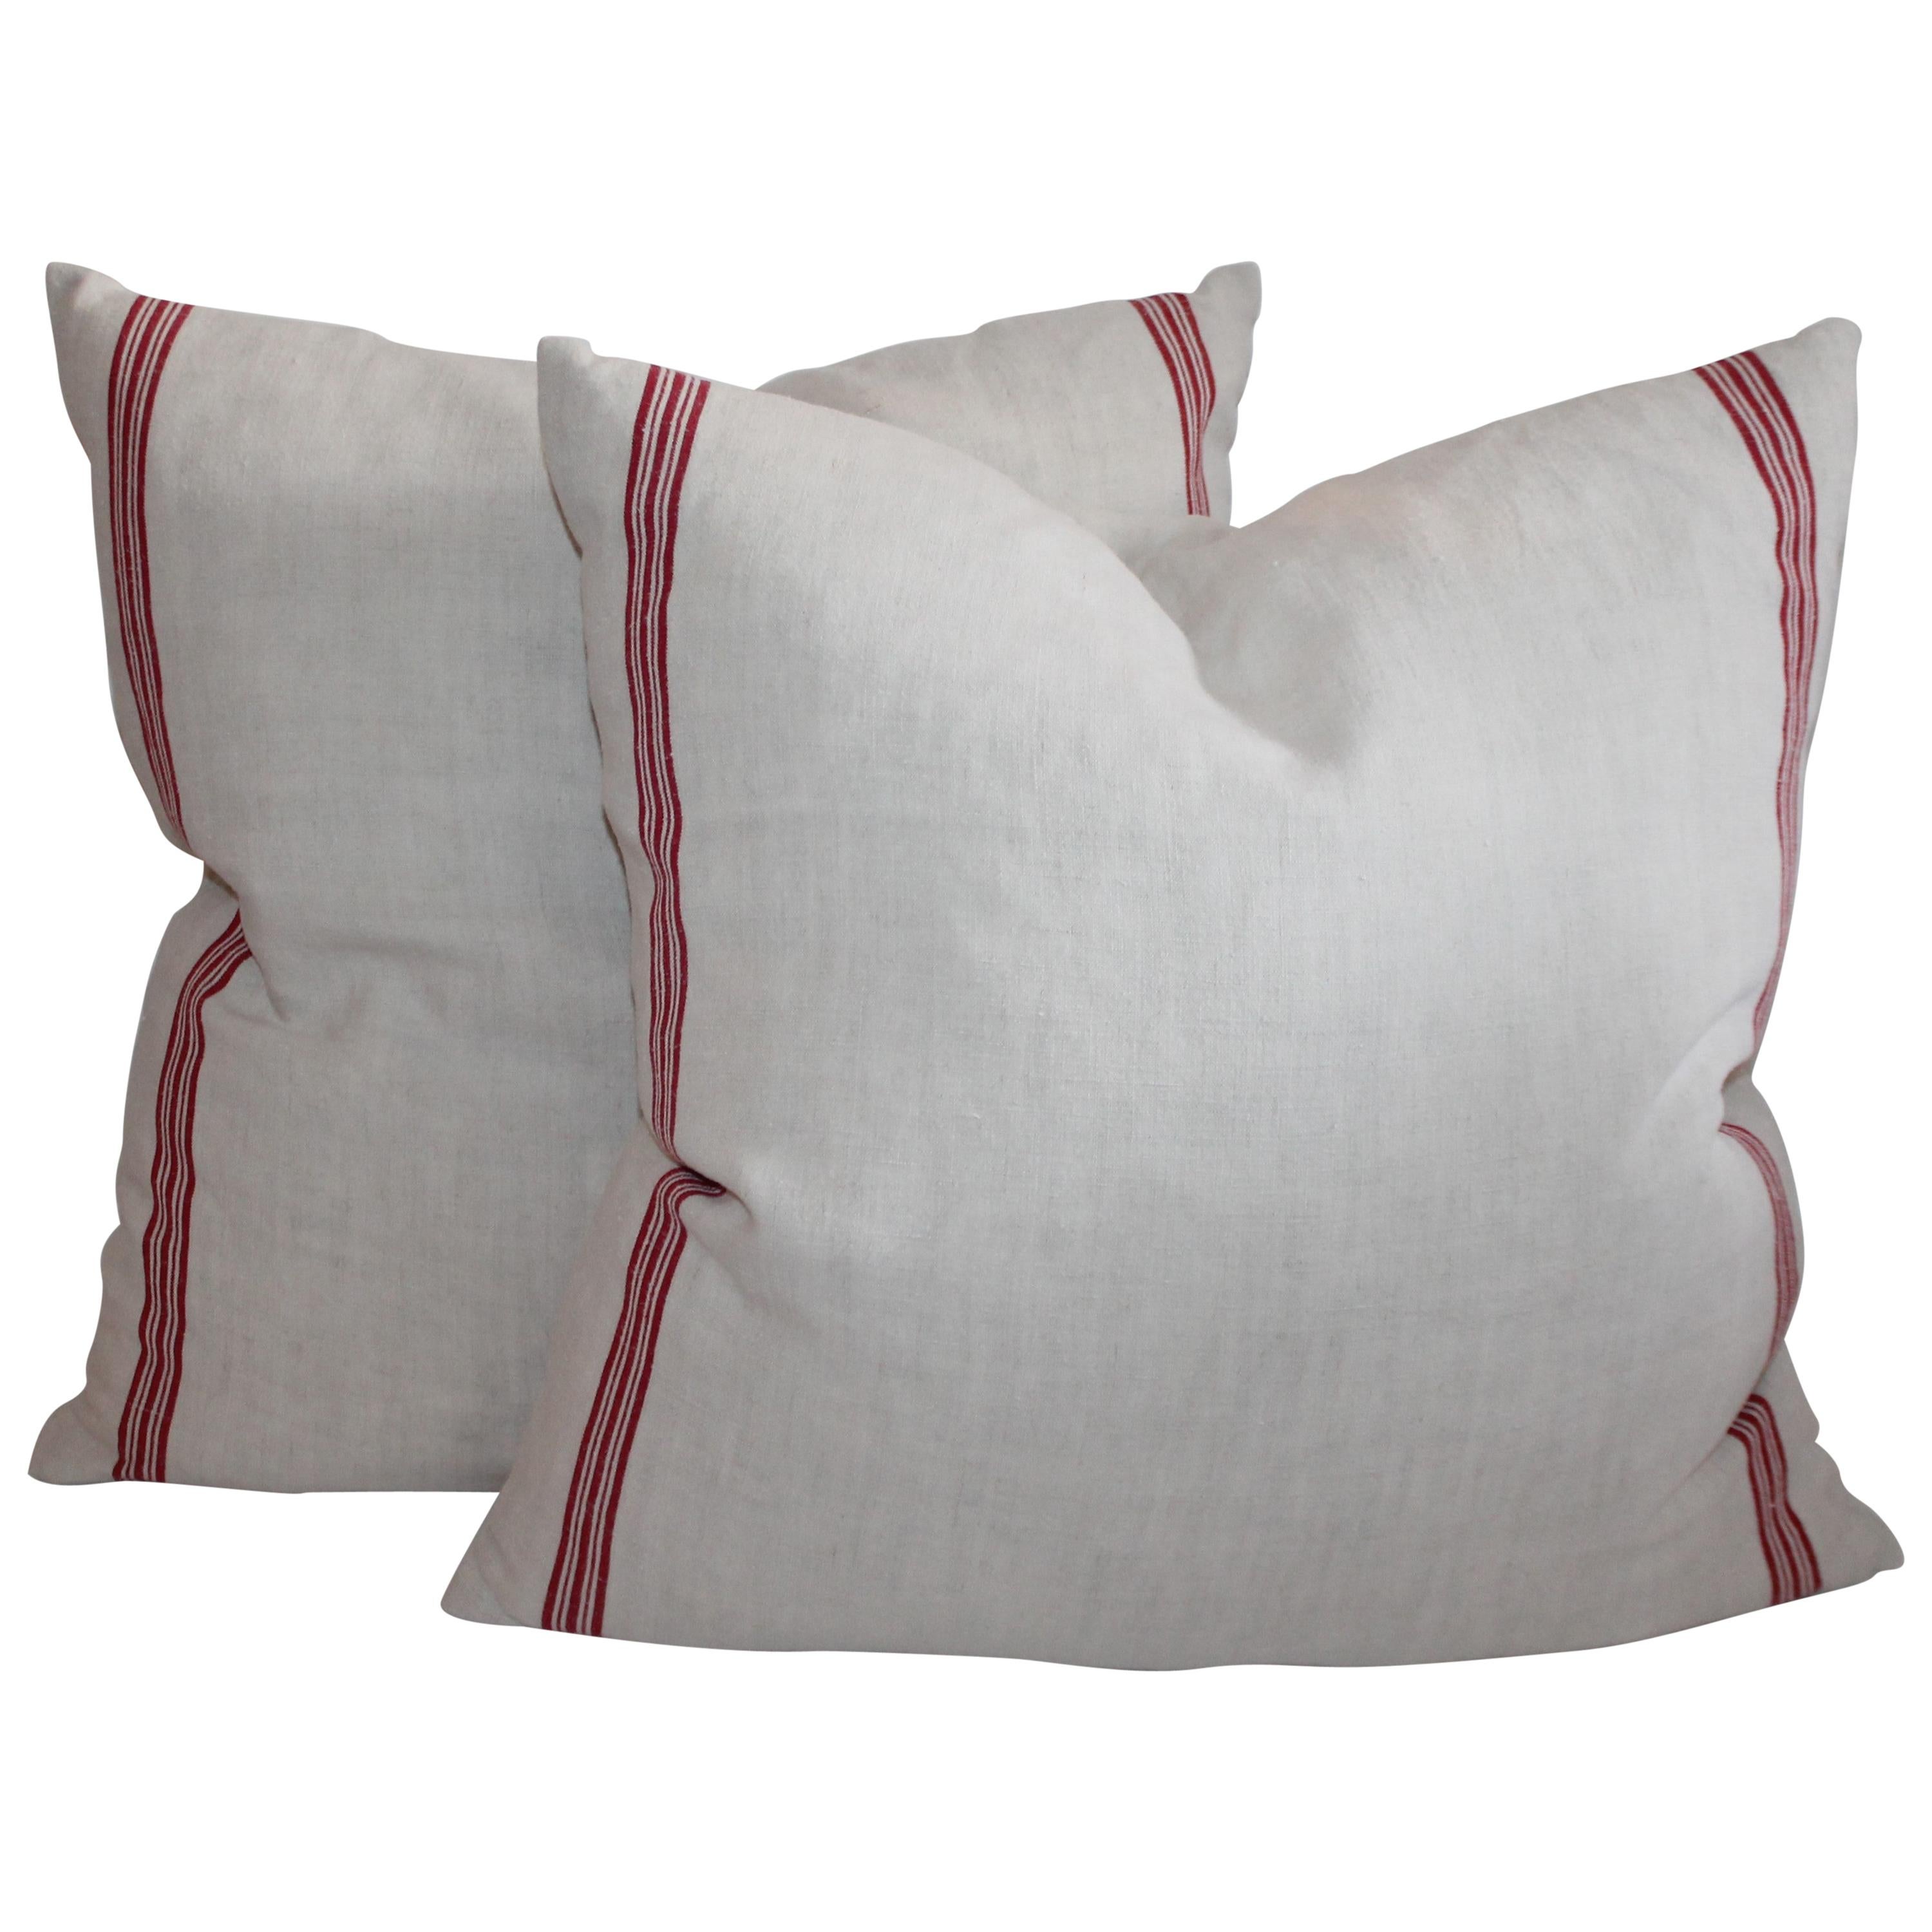 19th Century Double Sided Red & White Linen Pillows, Pair